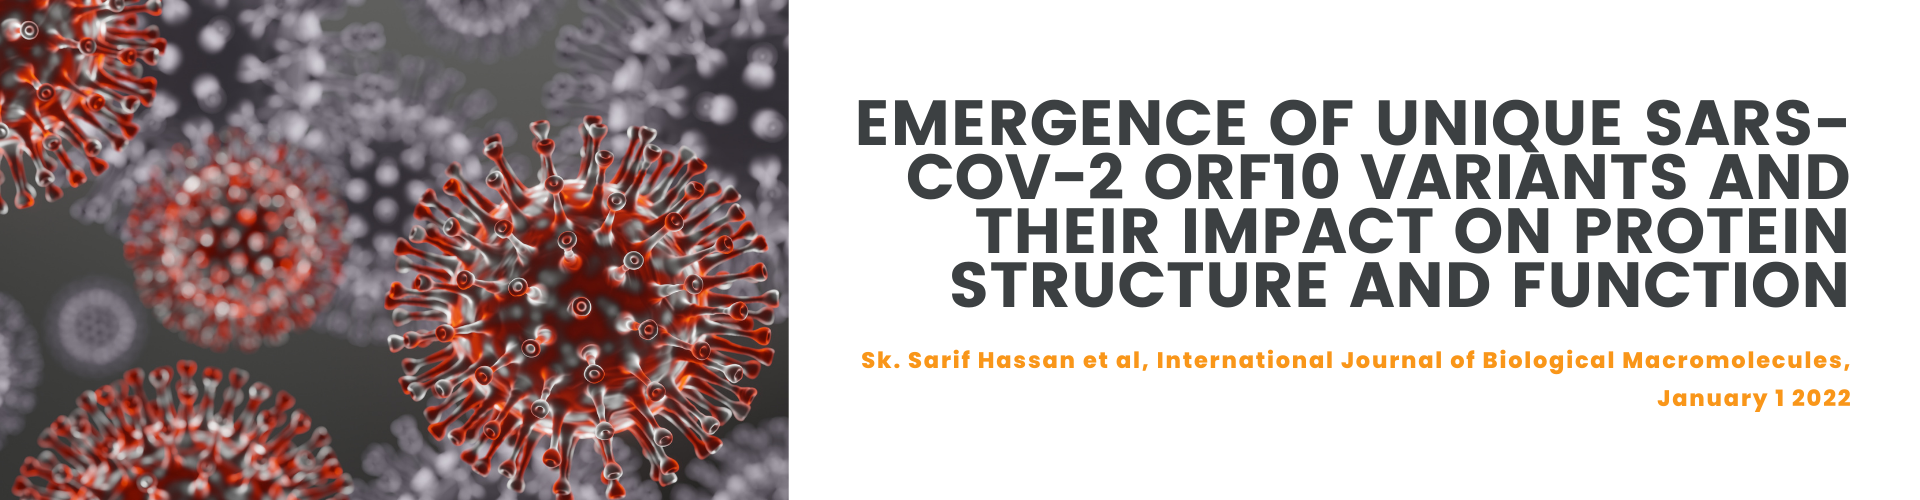 Emergence of unique SARS-CoV-2 ORF10 variants and their impact on protein structure and function